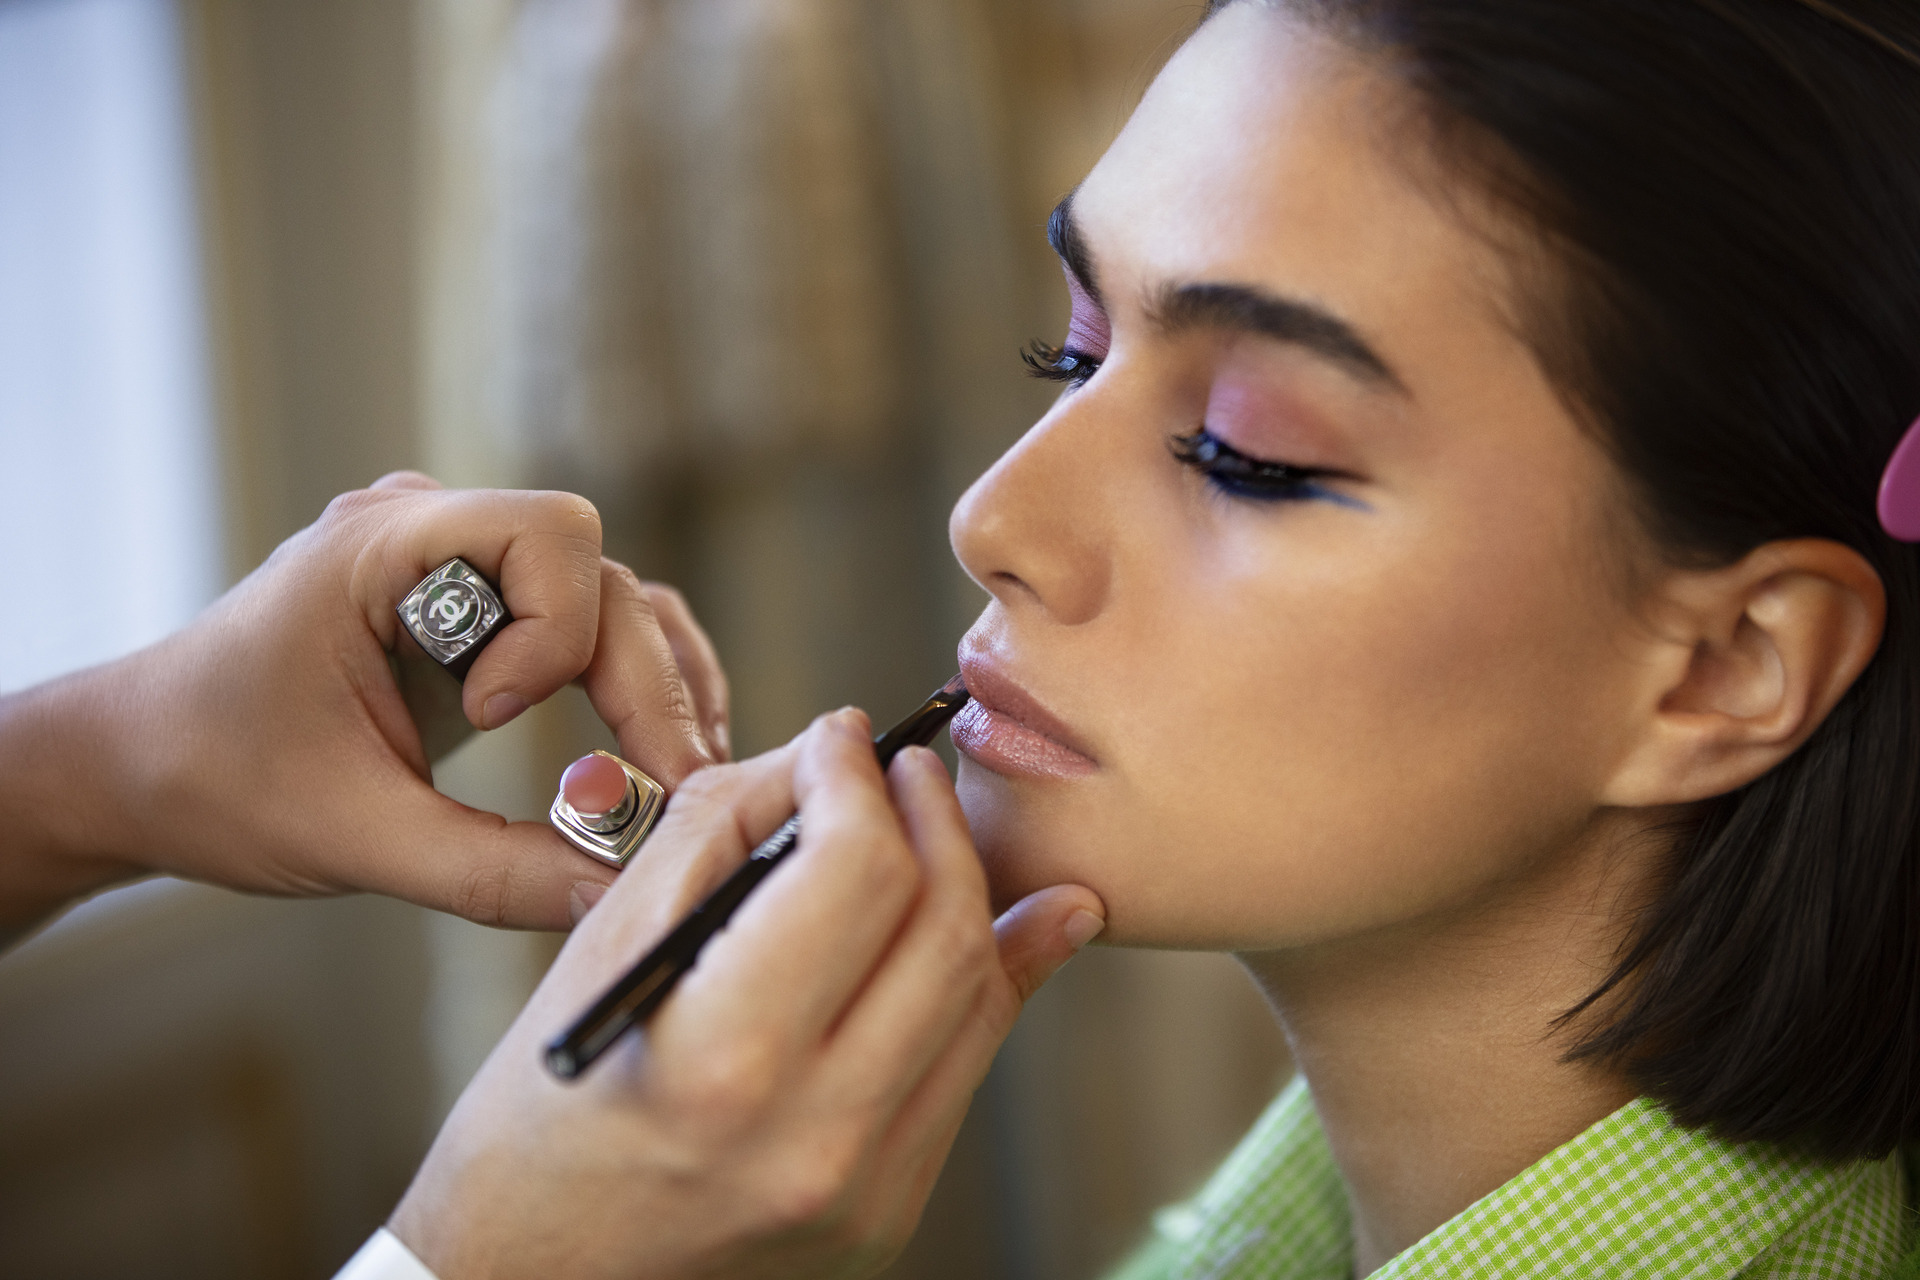 Chanel Spring 2021 Makeup Collection preview - Angela van Rose